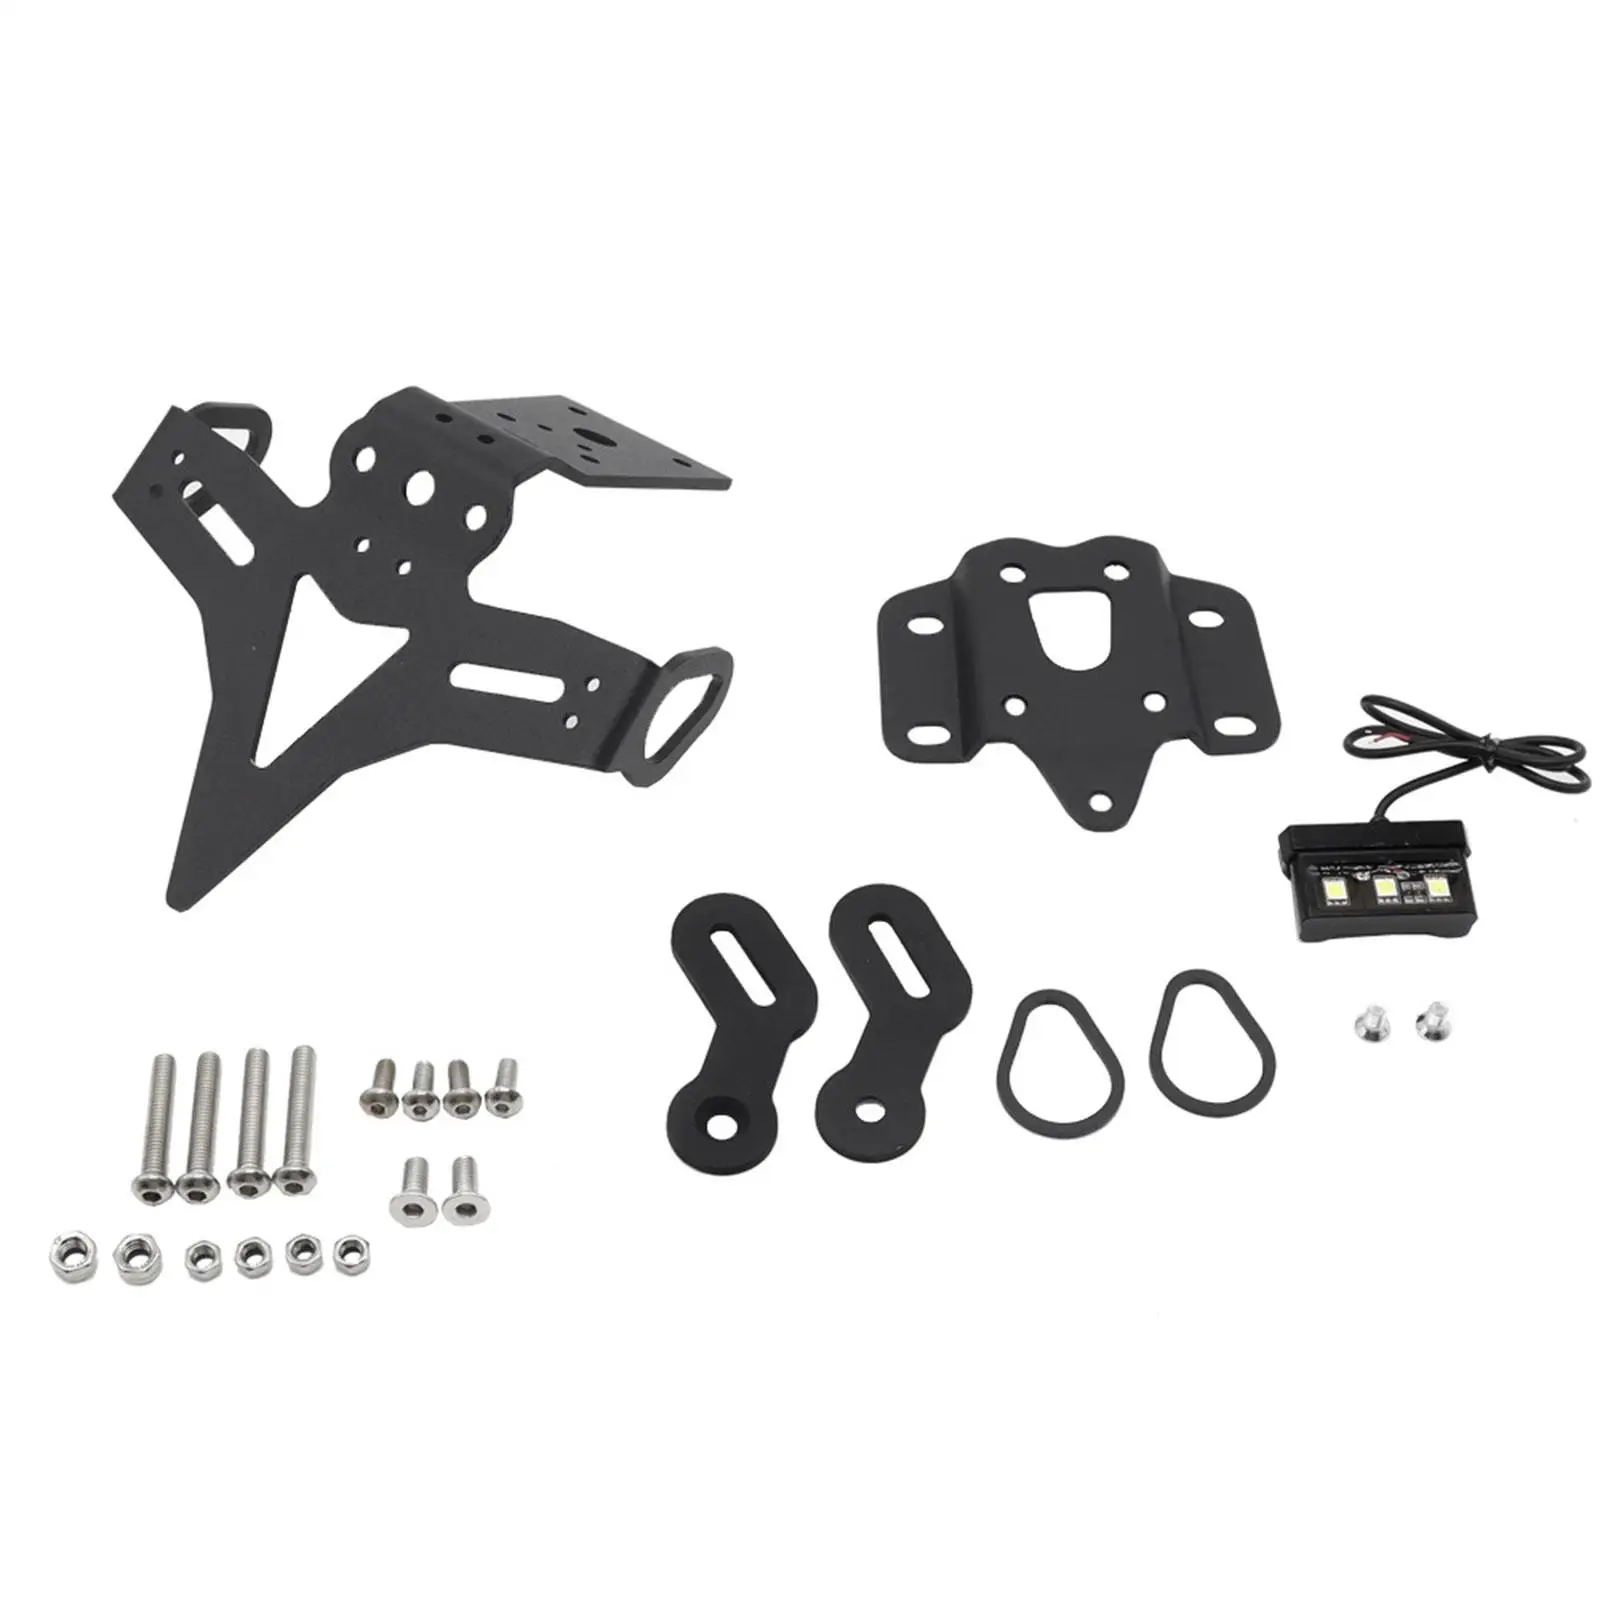 Motorcycle License Plate Holder Motorcycle Fender Kit for FZ-07 2014-on